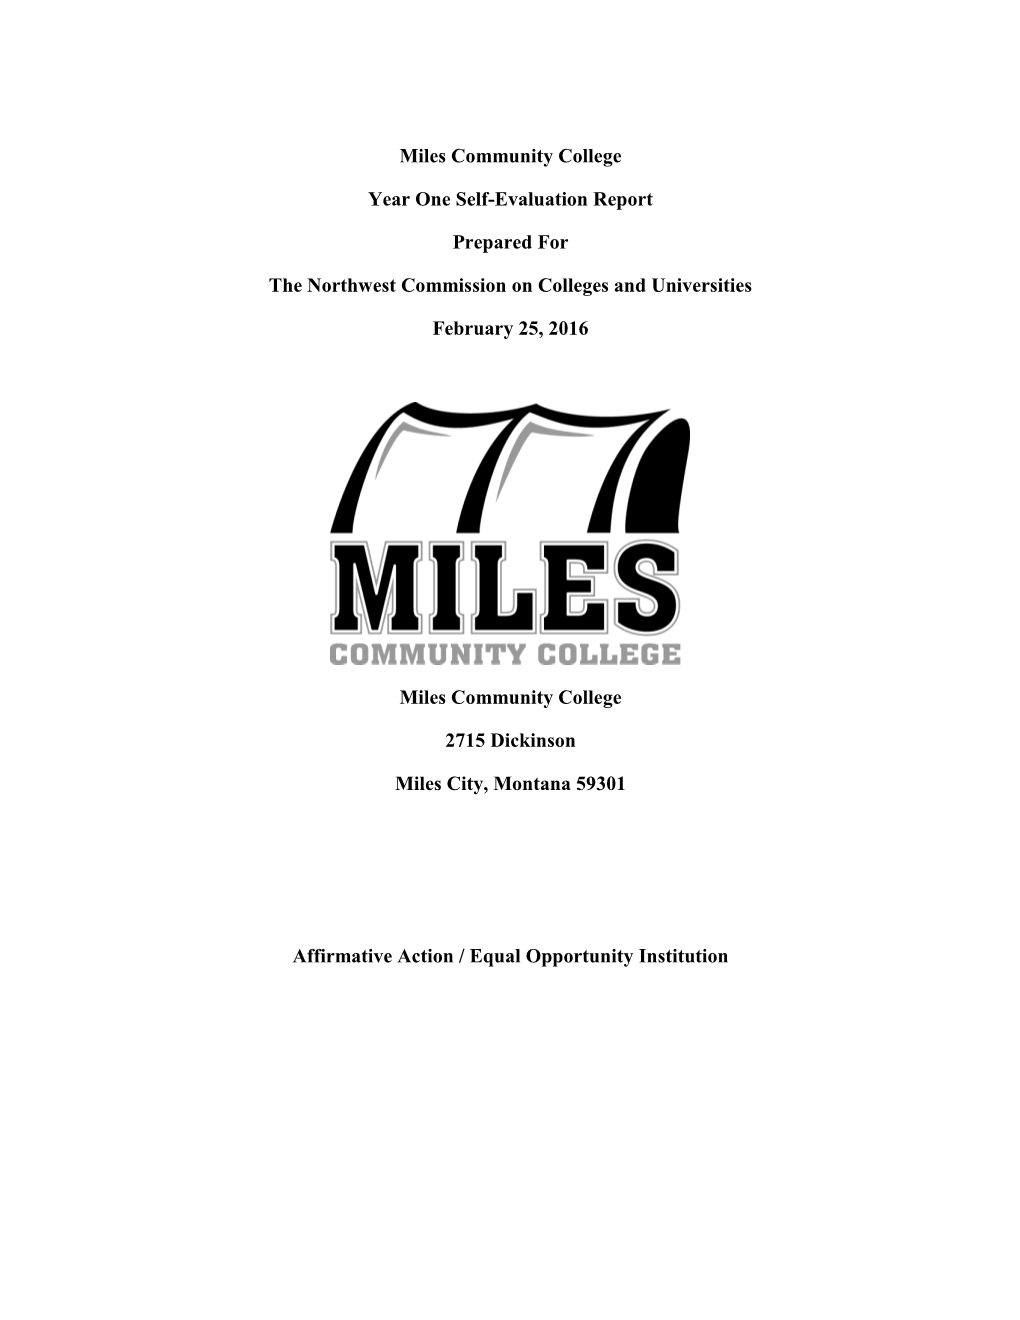 Miles Community College Year One Self-Evaluation Report Prepared